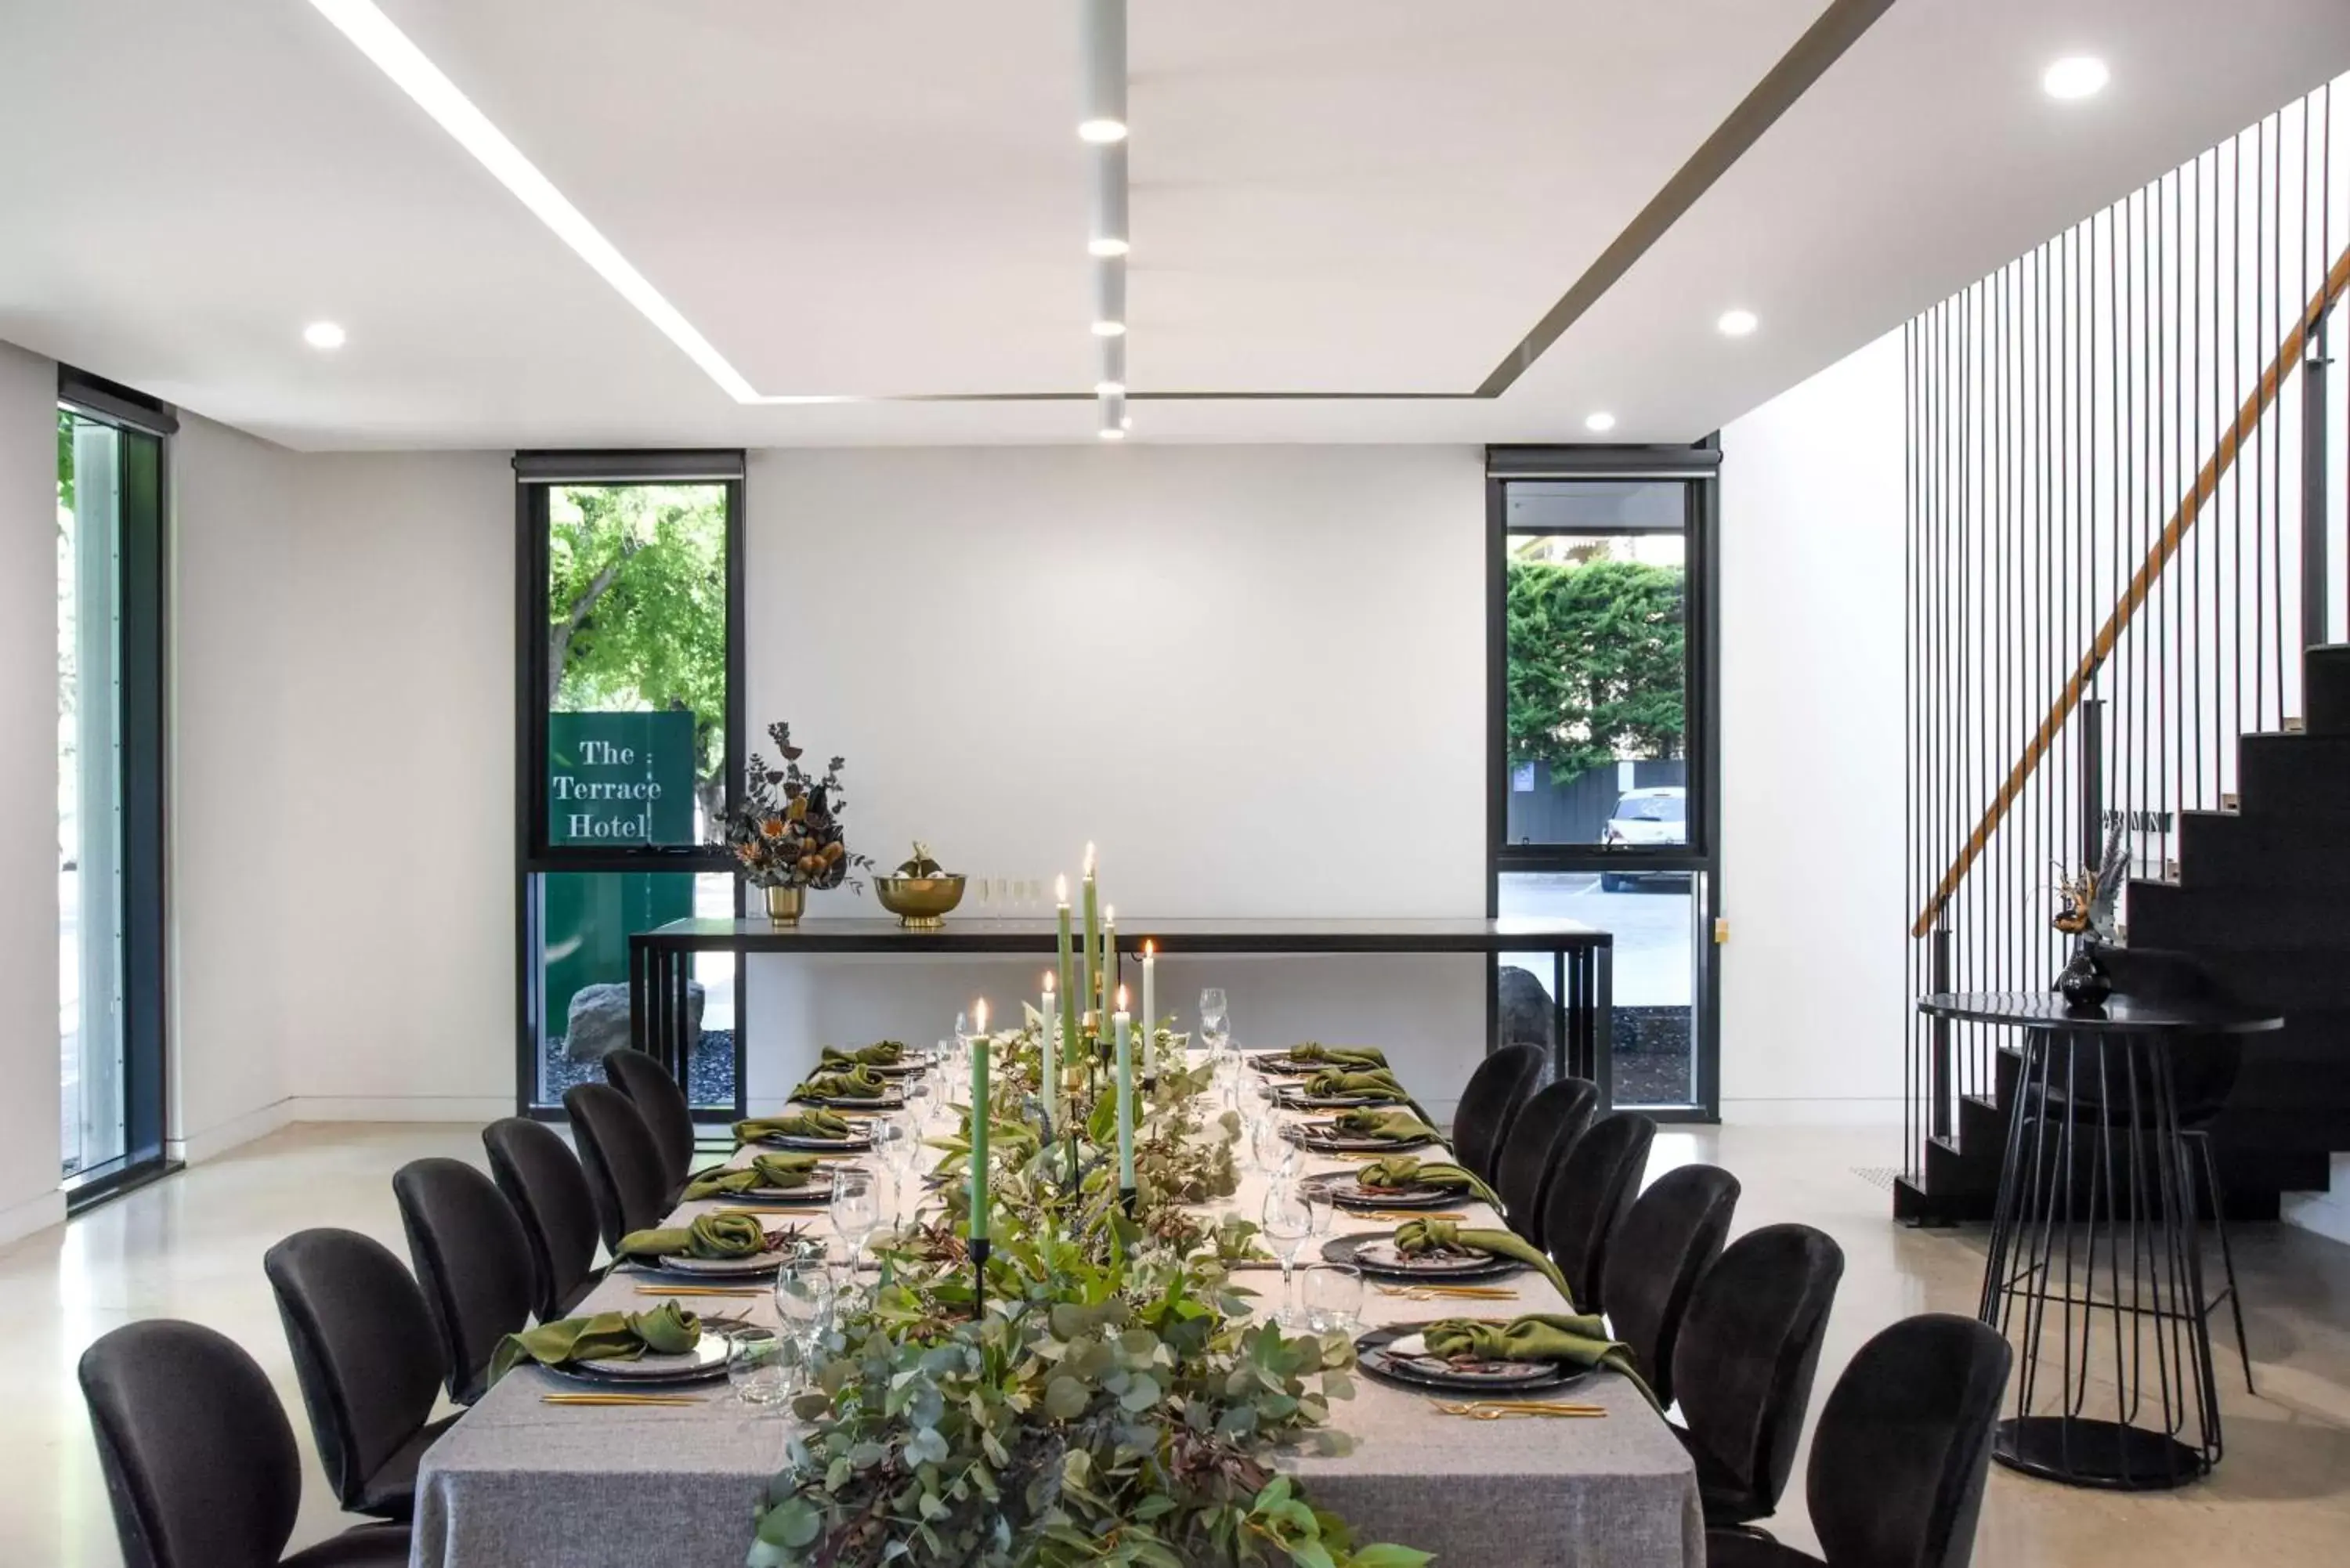 Meeting/conference room, Banquet Facilities in Sage Hotel Adelaide